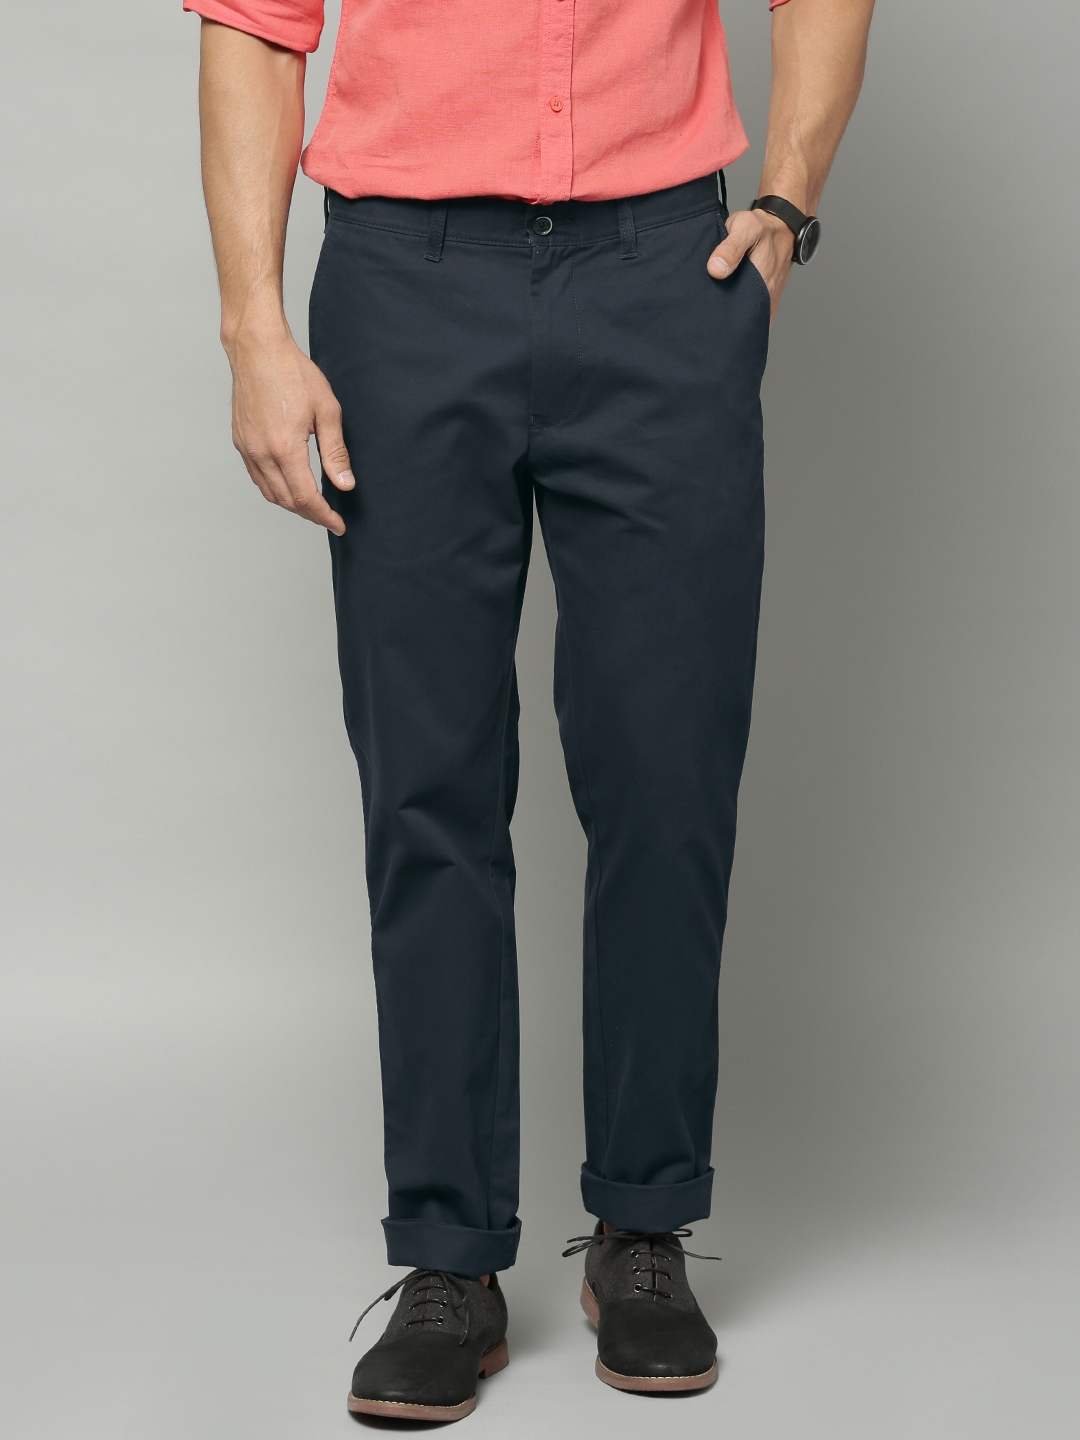 Marks  Spencer launches cycling chinos  roadcc